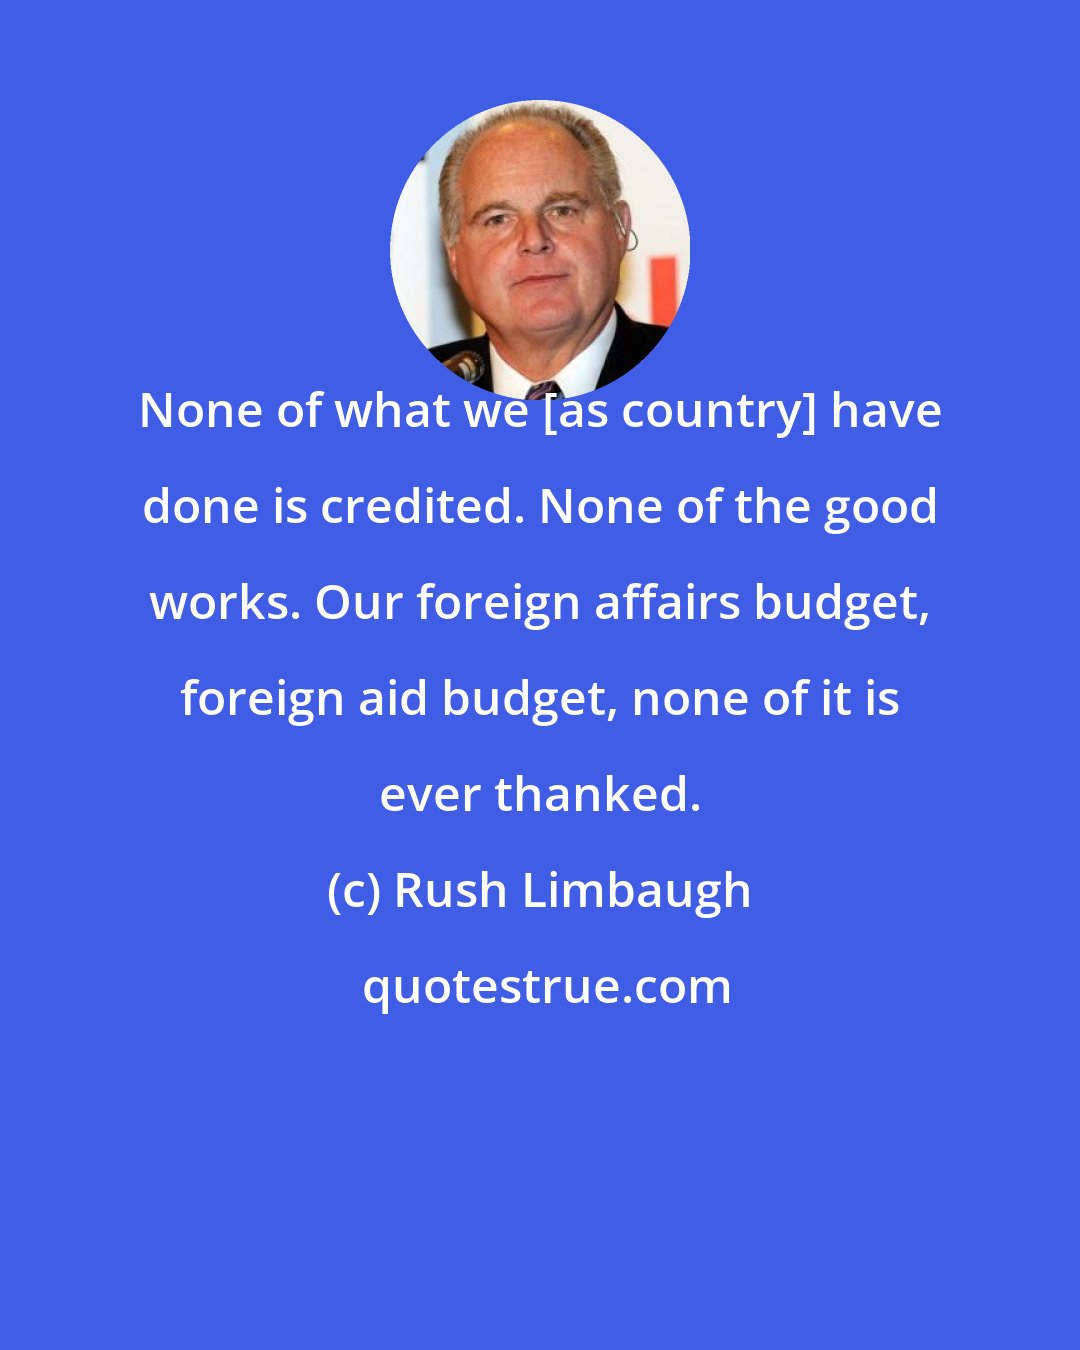 Rush Limbaugh: None of what we [as country] have done is credited. None of the good works. Our foreign affairs budget, foreign aid budget, none of it is ever thanked.